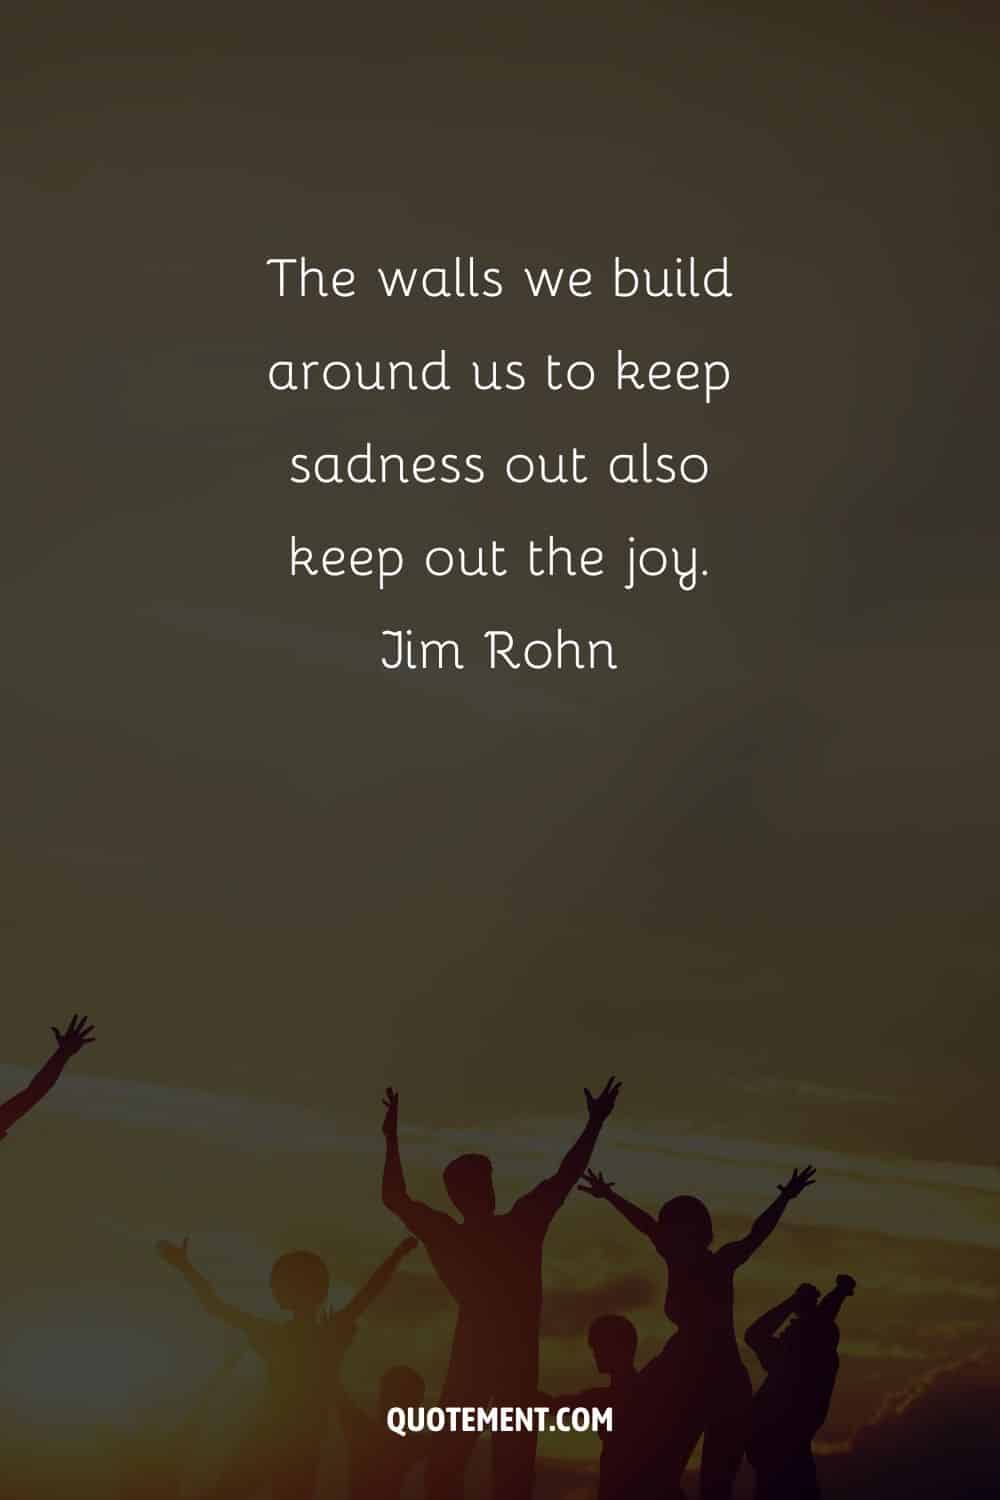 The walls we build around us to keep sadness out also keep out the joy